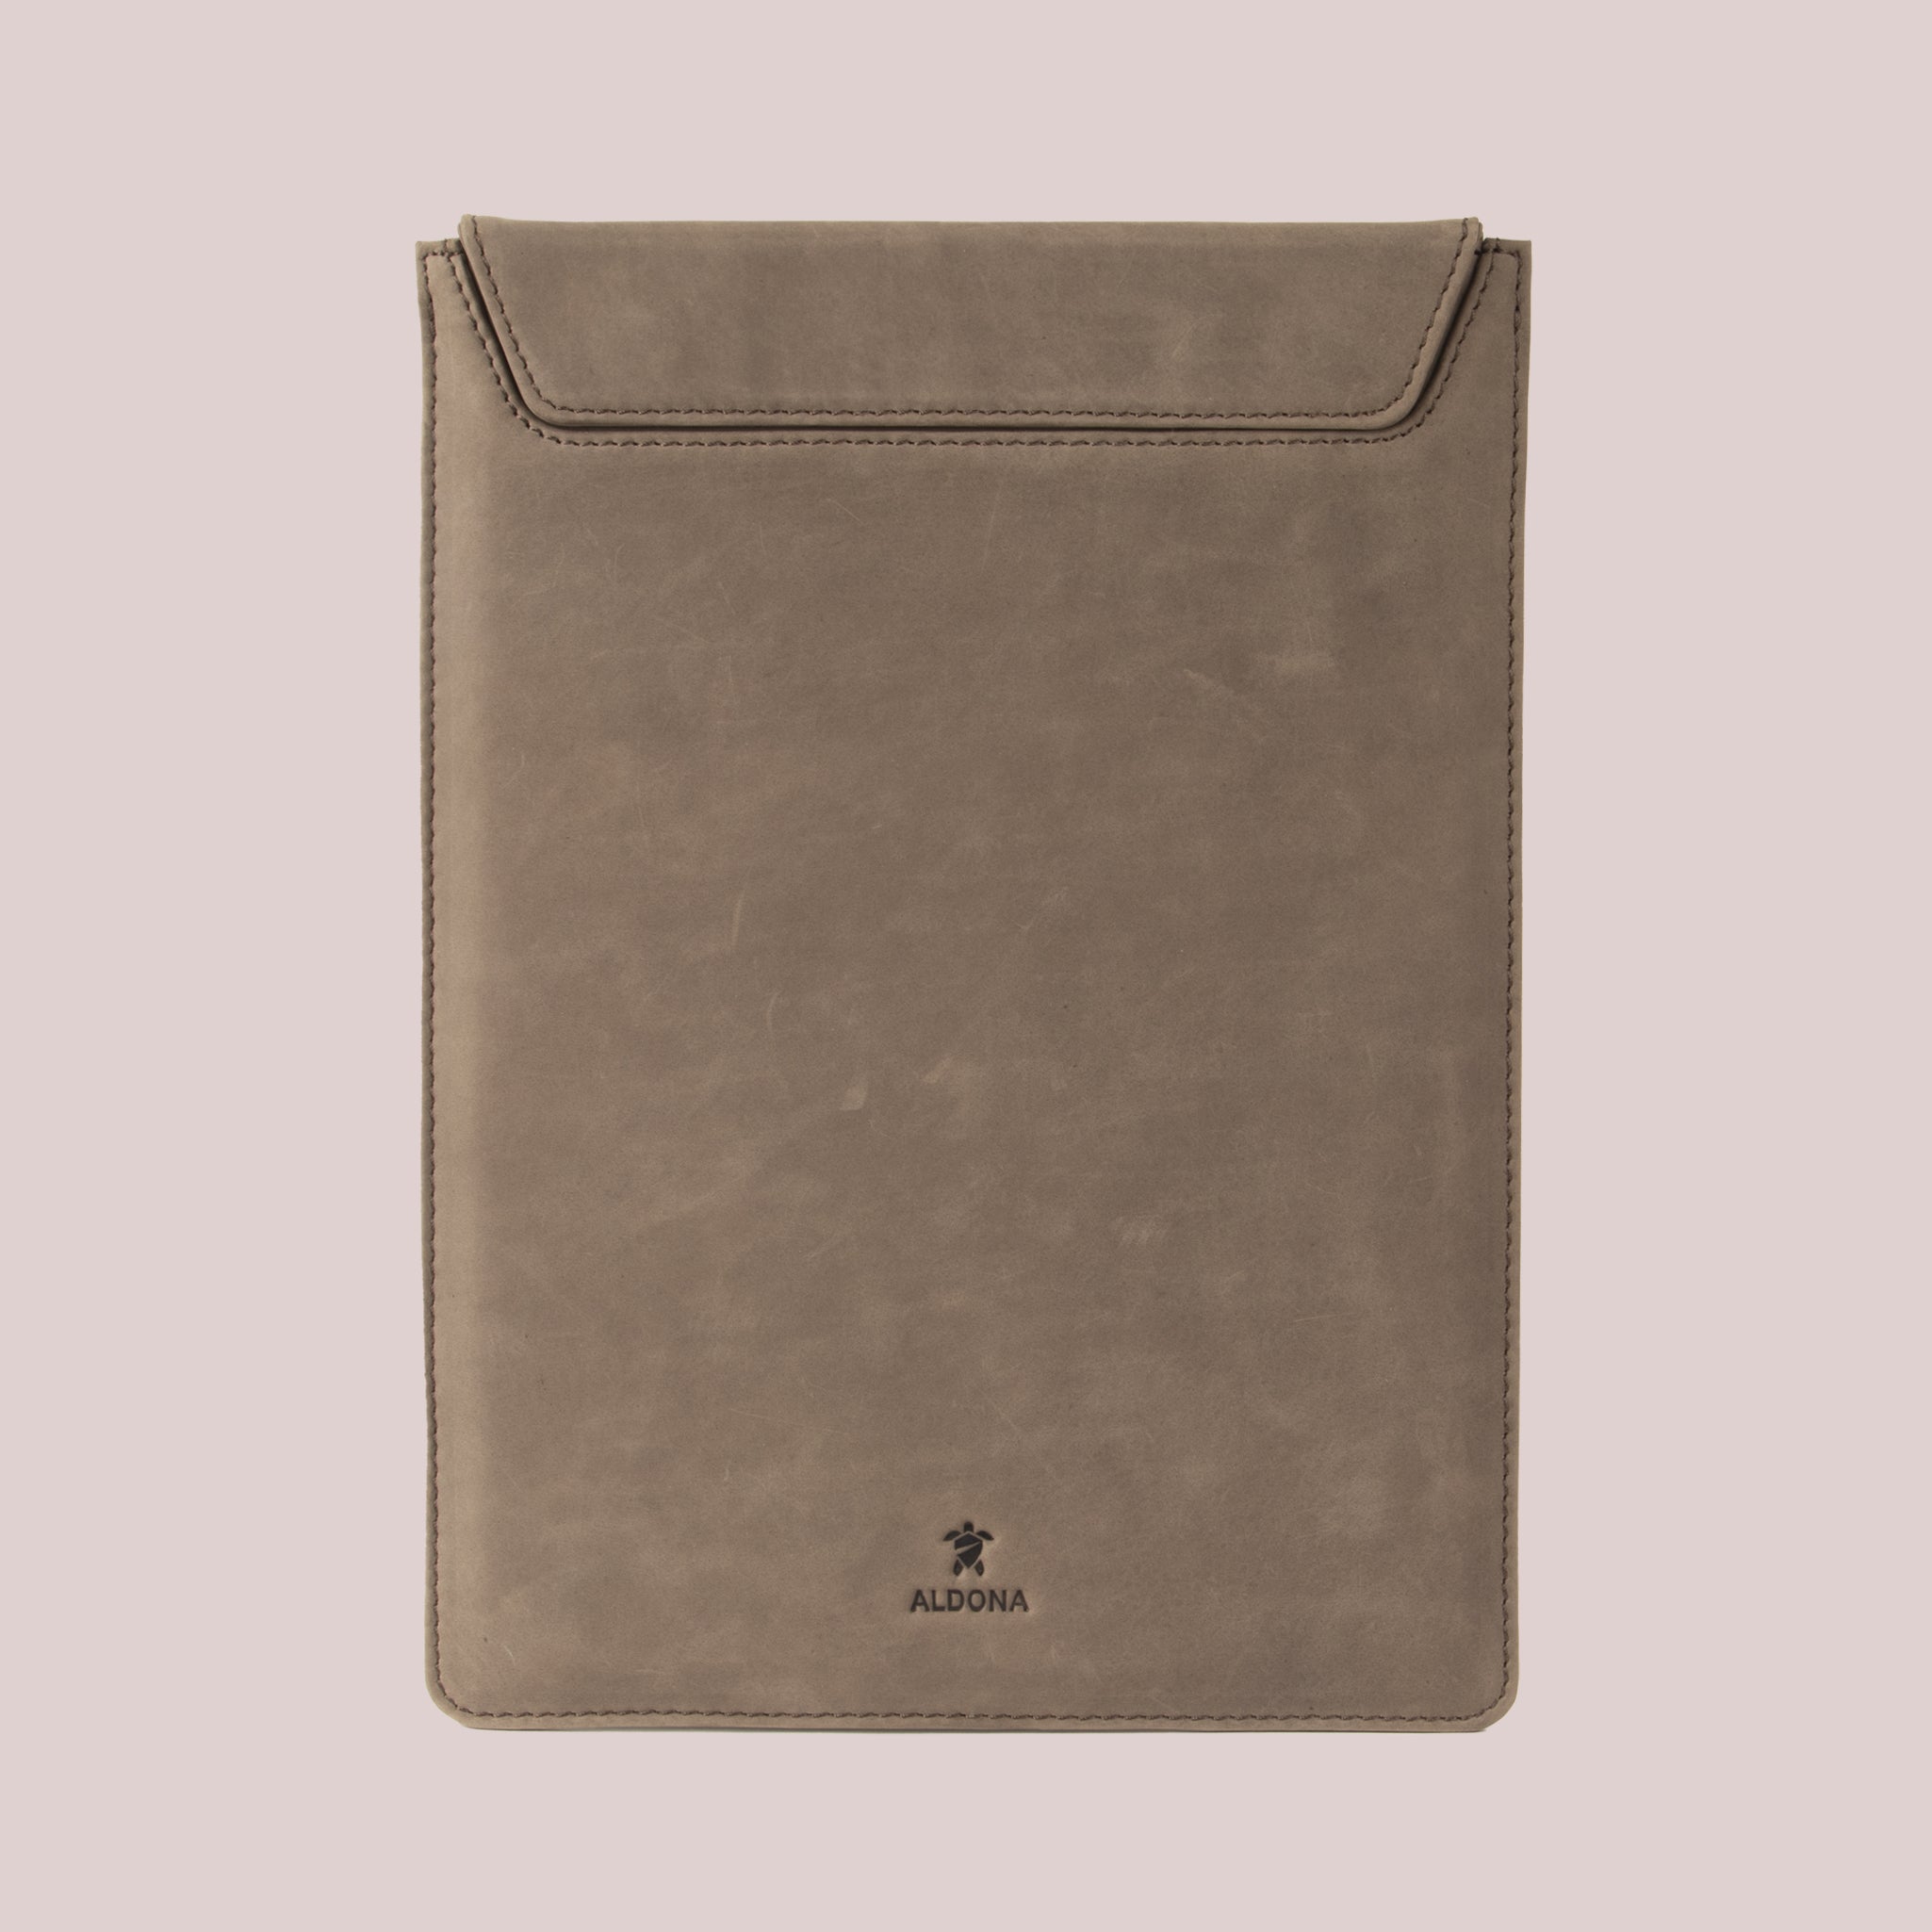 Buy grey leather sleeve for Macbook laptops, with a flap